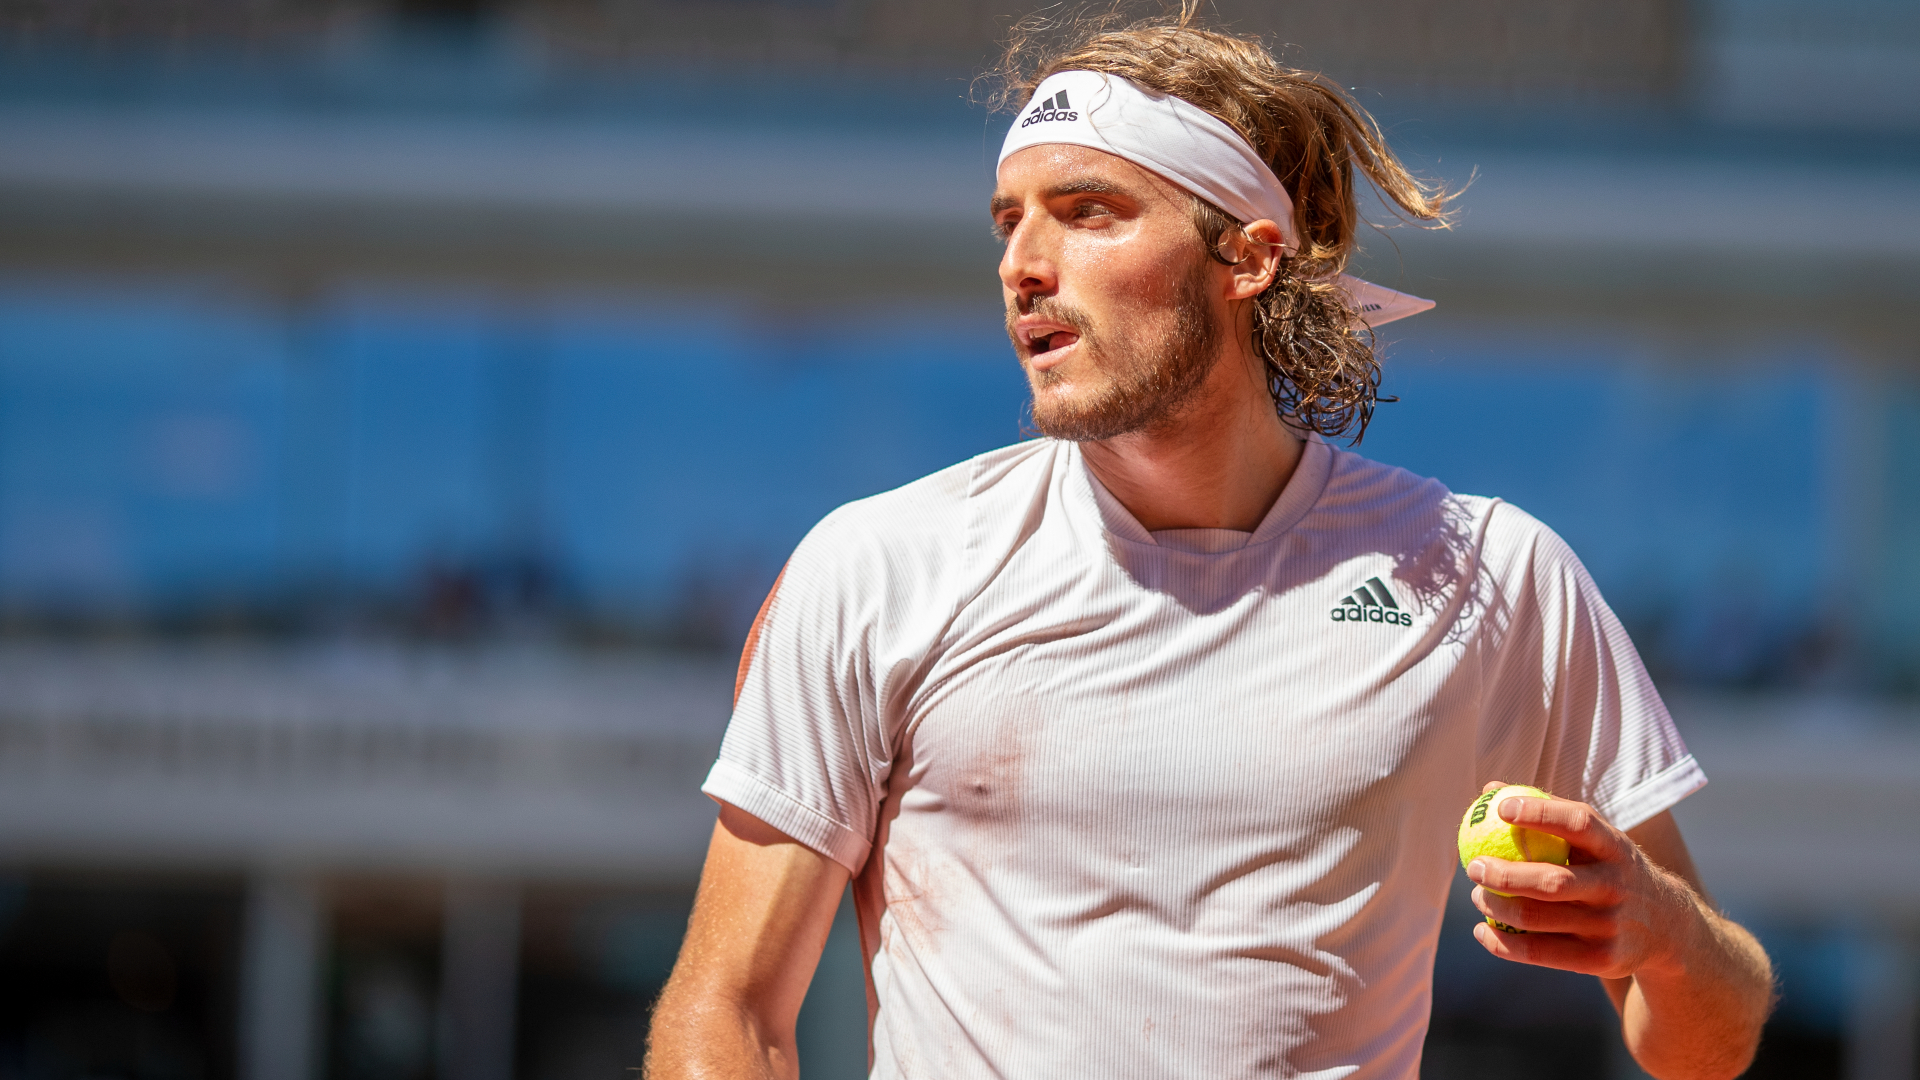 World number three Stefanos Tsitsipas will get the COVID-19 vaccine if it becomes mandatory on the ATP Tour.